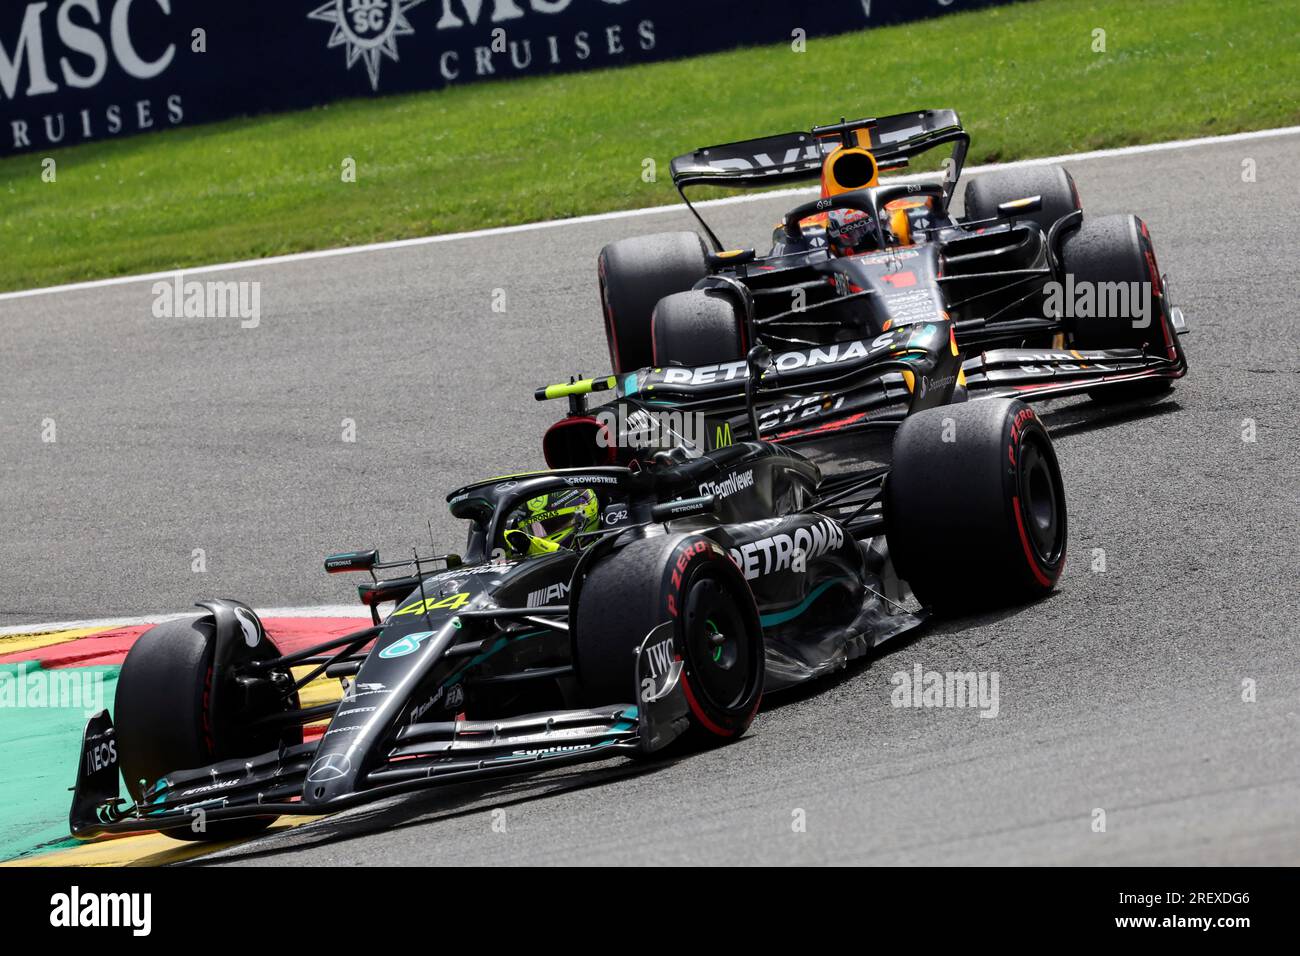 Mercedes driver Lewis Hamilton of Britain, left, and Red Bull driver Max  Verstappen of the Netherlands steer their cars during the Formula One Grand  Prix at the Spa-Francorchamps racetrack in Spa, Belgium,